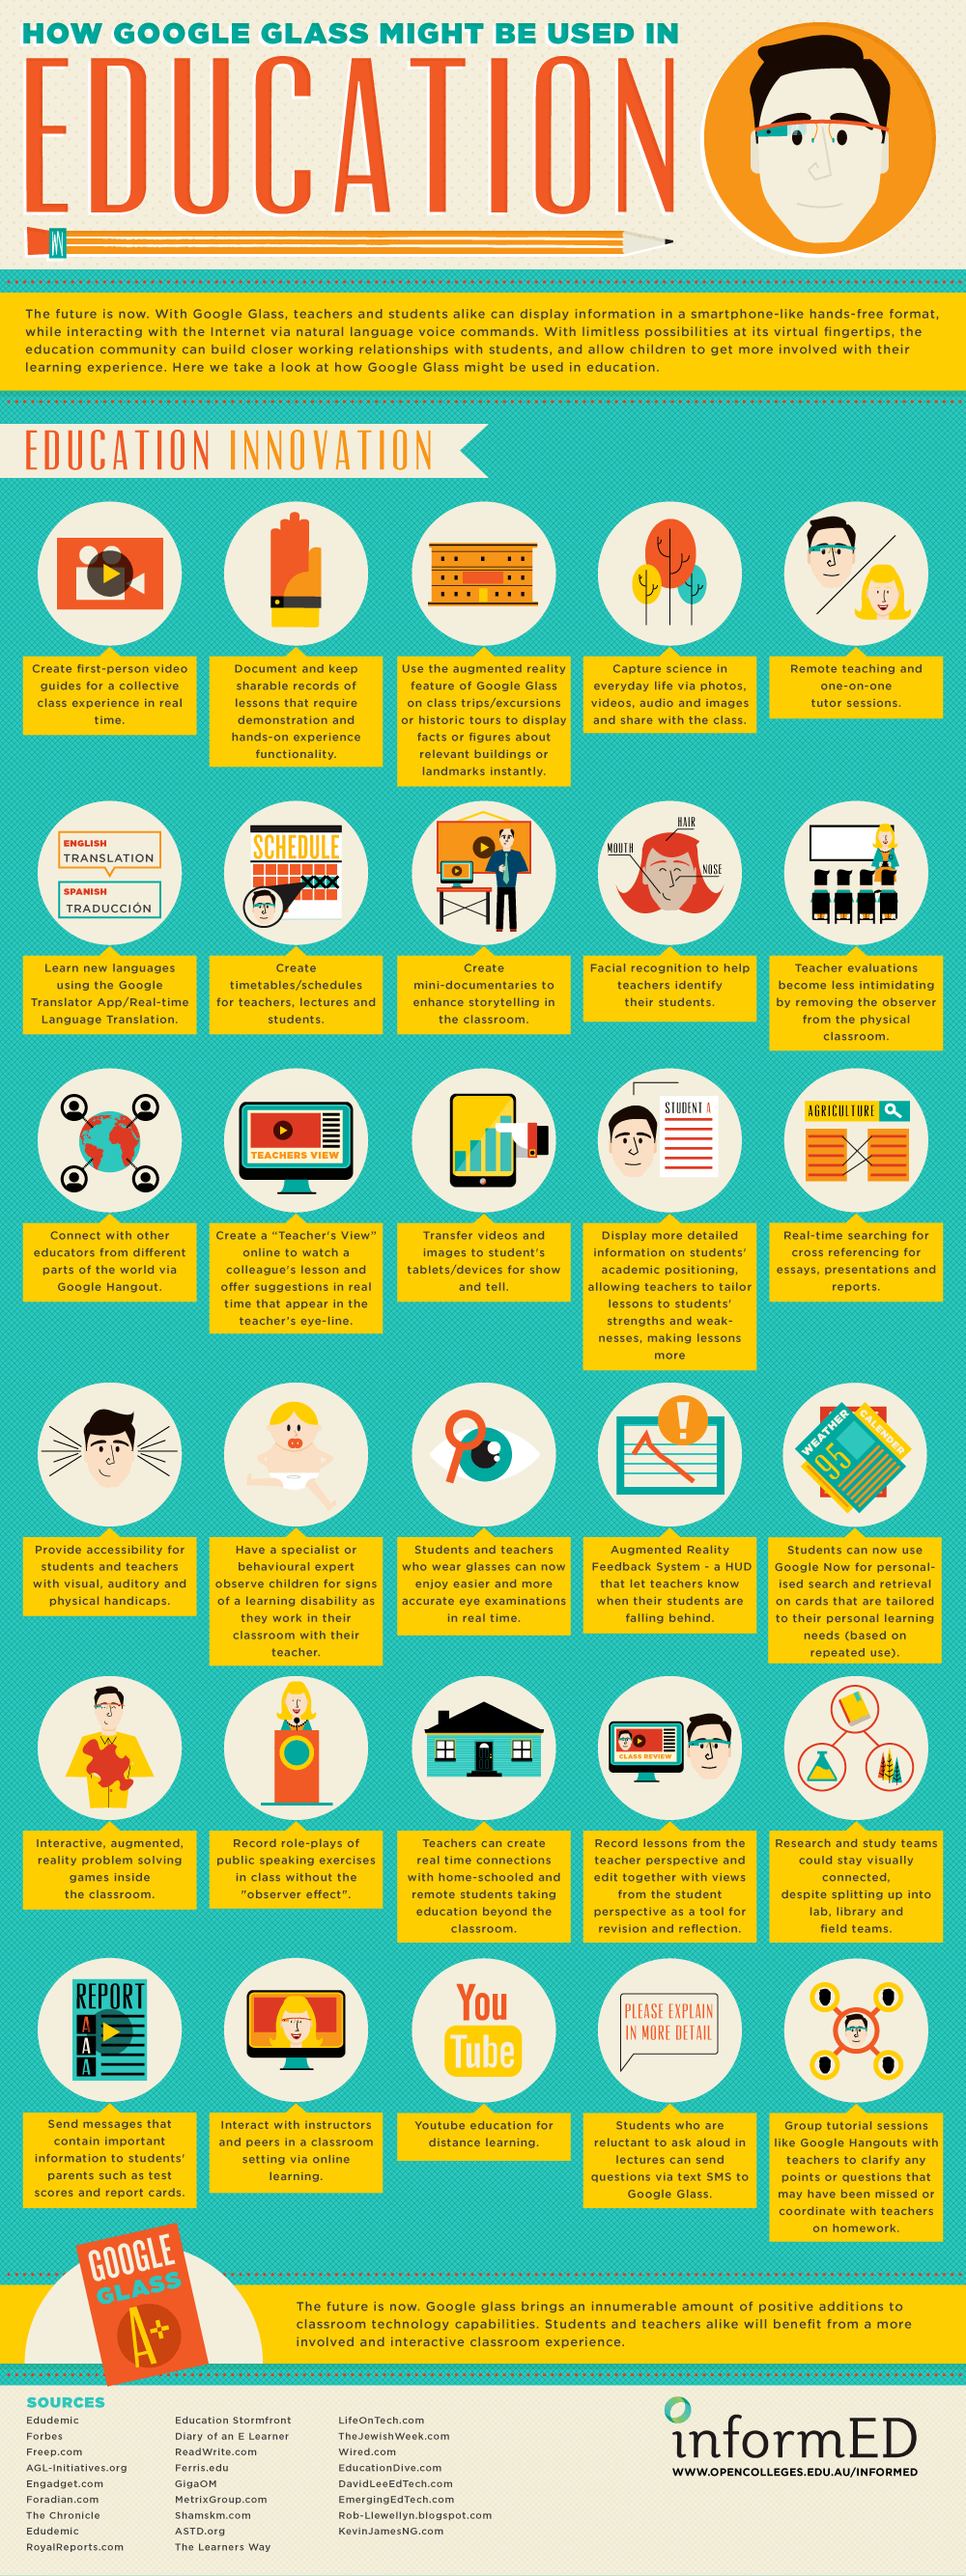 30 Creative Ways Google Glass Can Be Used In Education Infographic